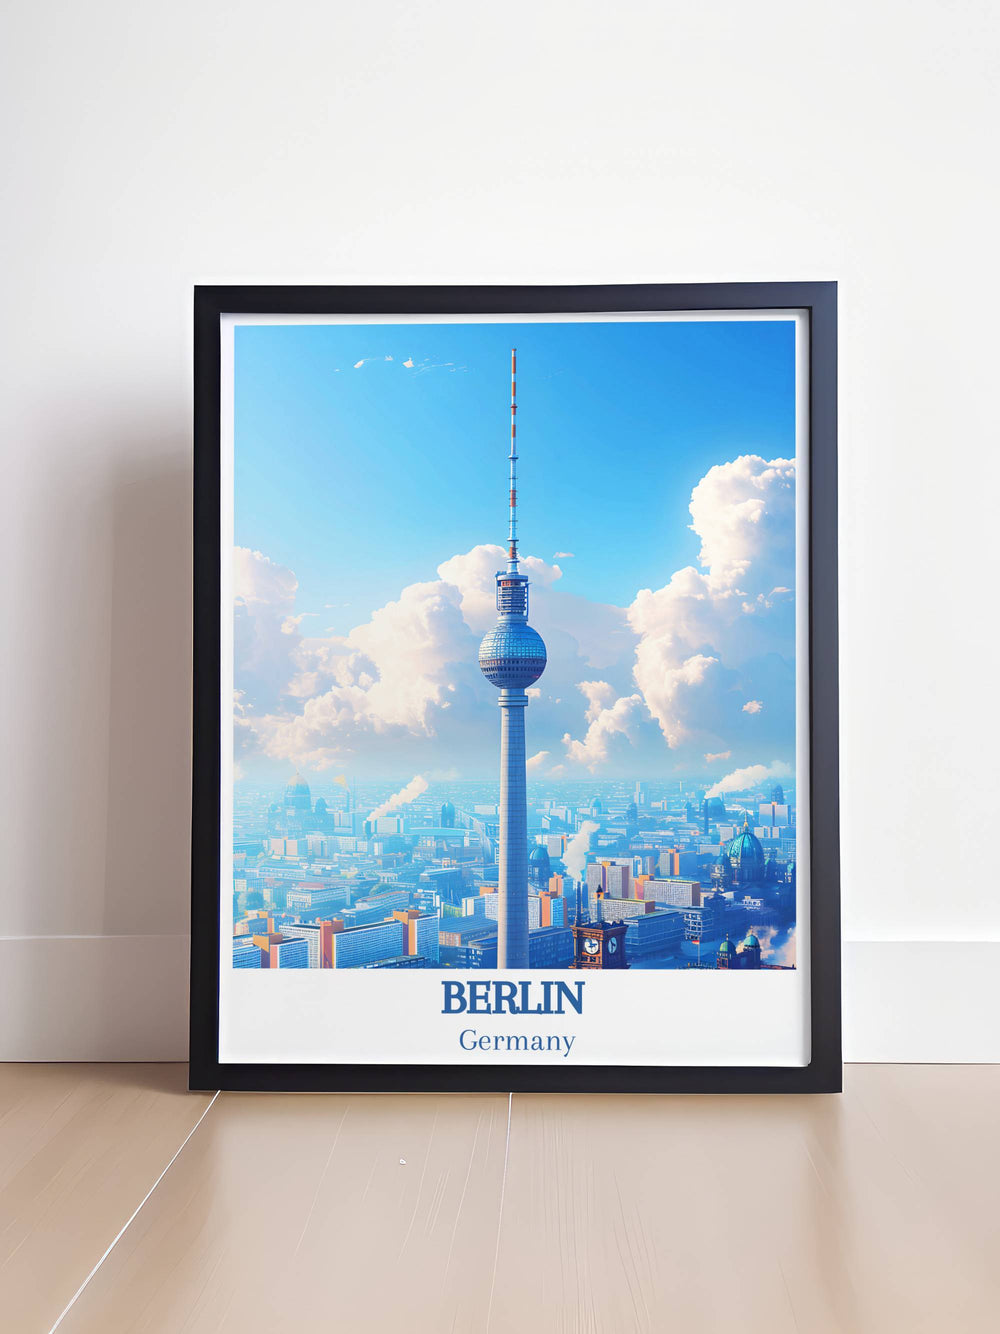 Berliner Fernsehturm print capturing the architectural beauty and historical significance of Berlin Germany.